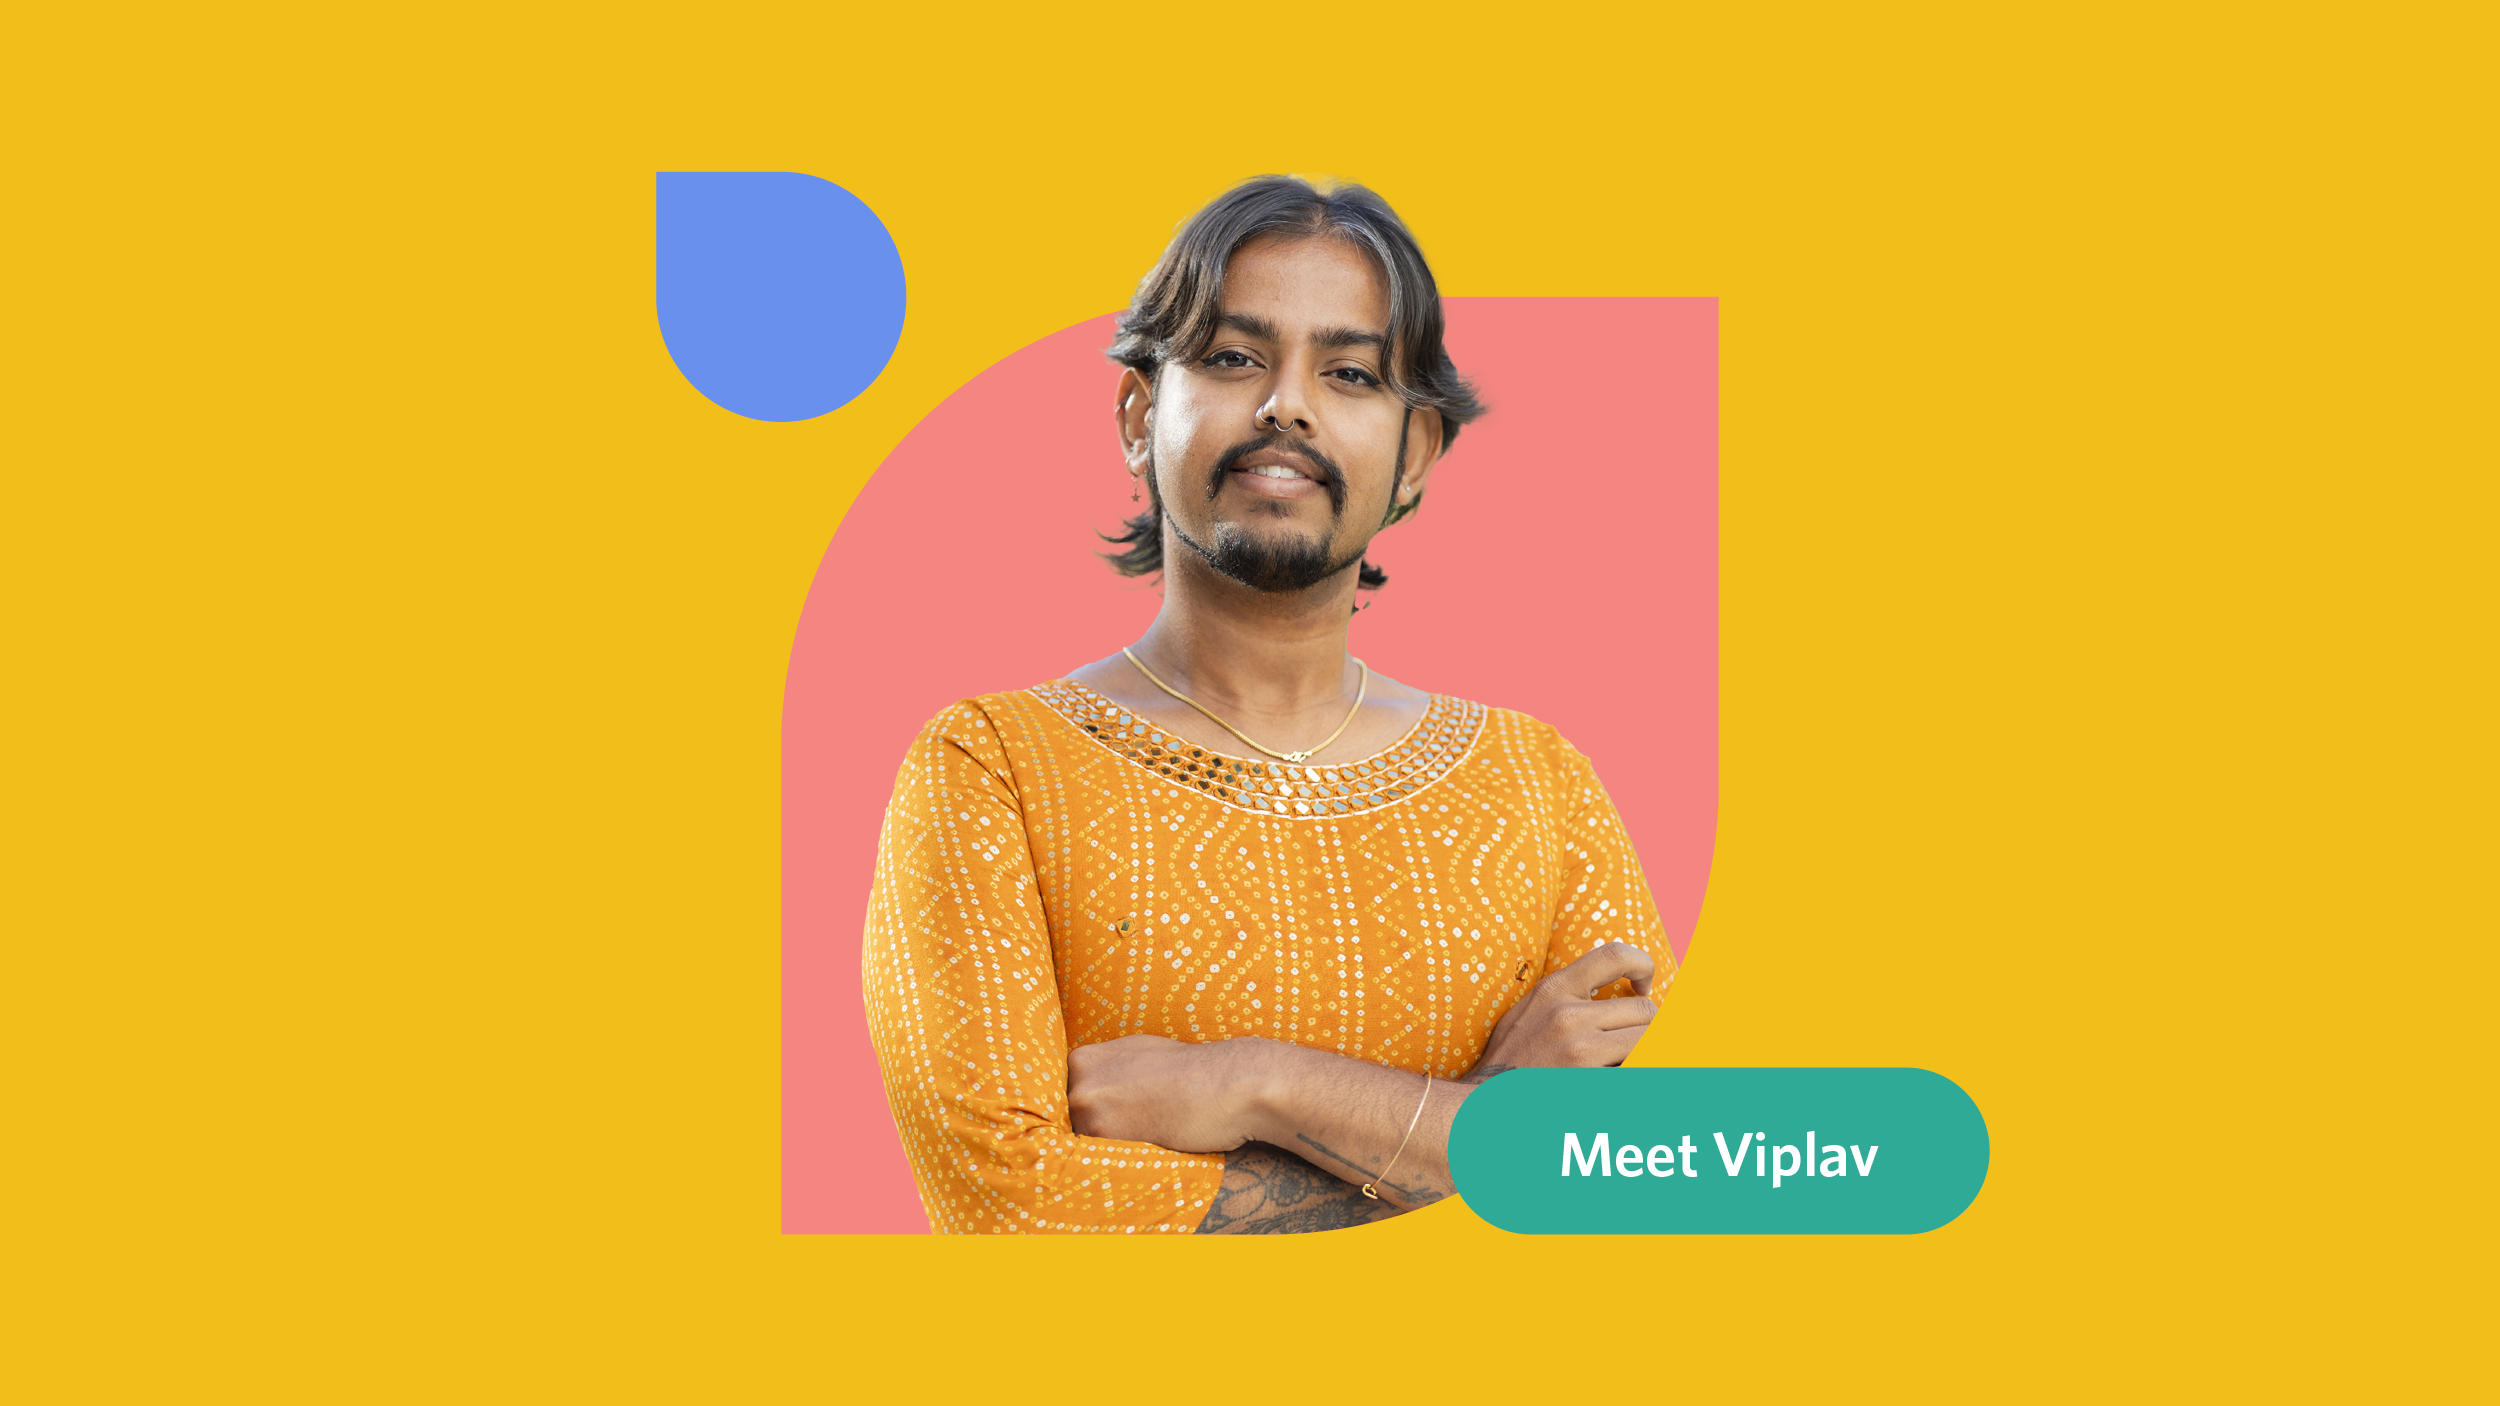 Yellow, pink, and blue graphic with a photo of Viplav with the text "Meet Viplav"